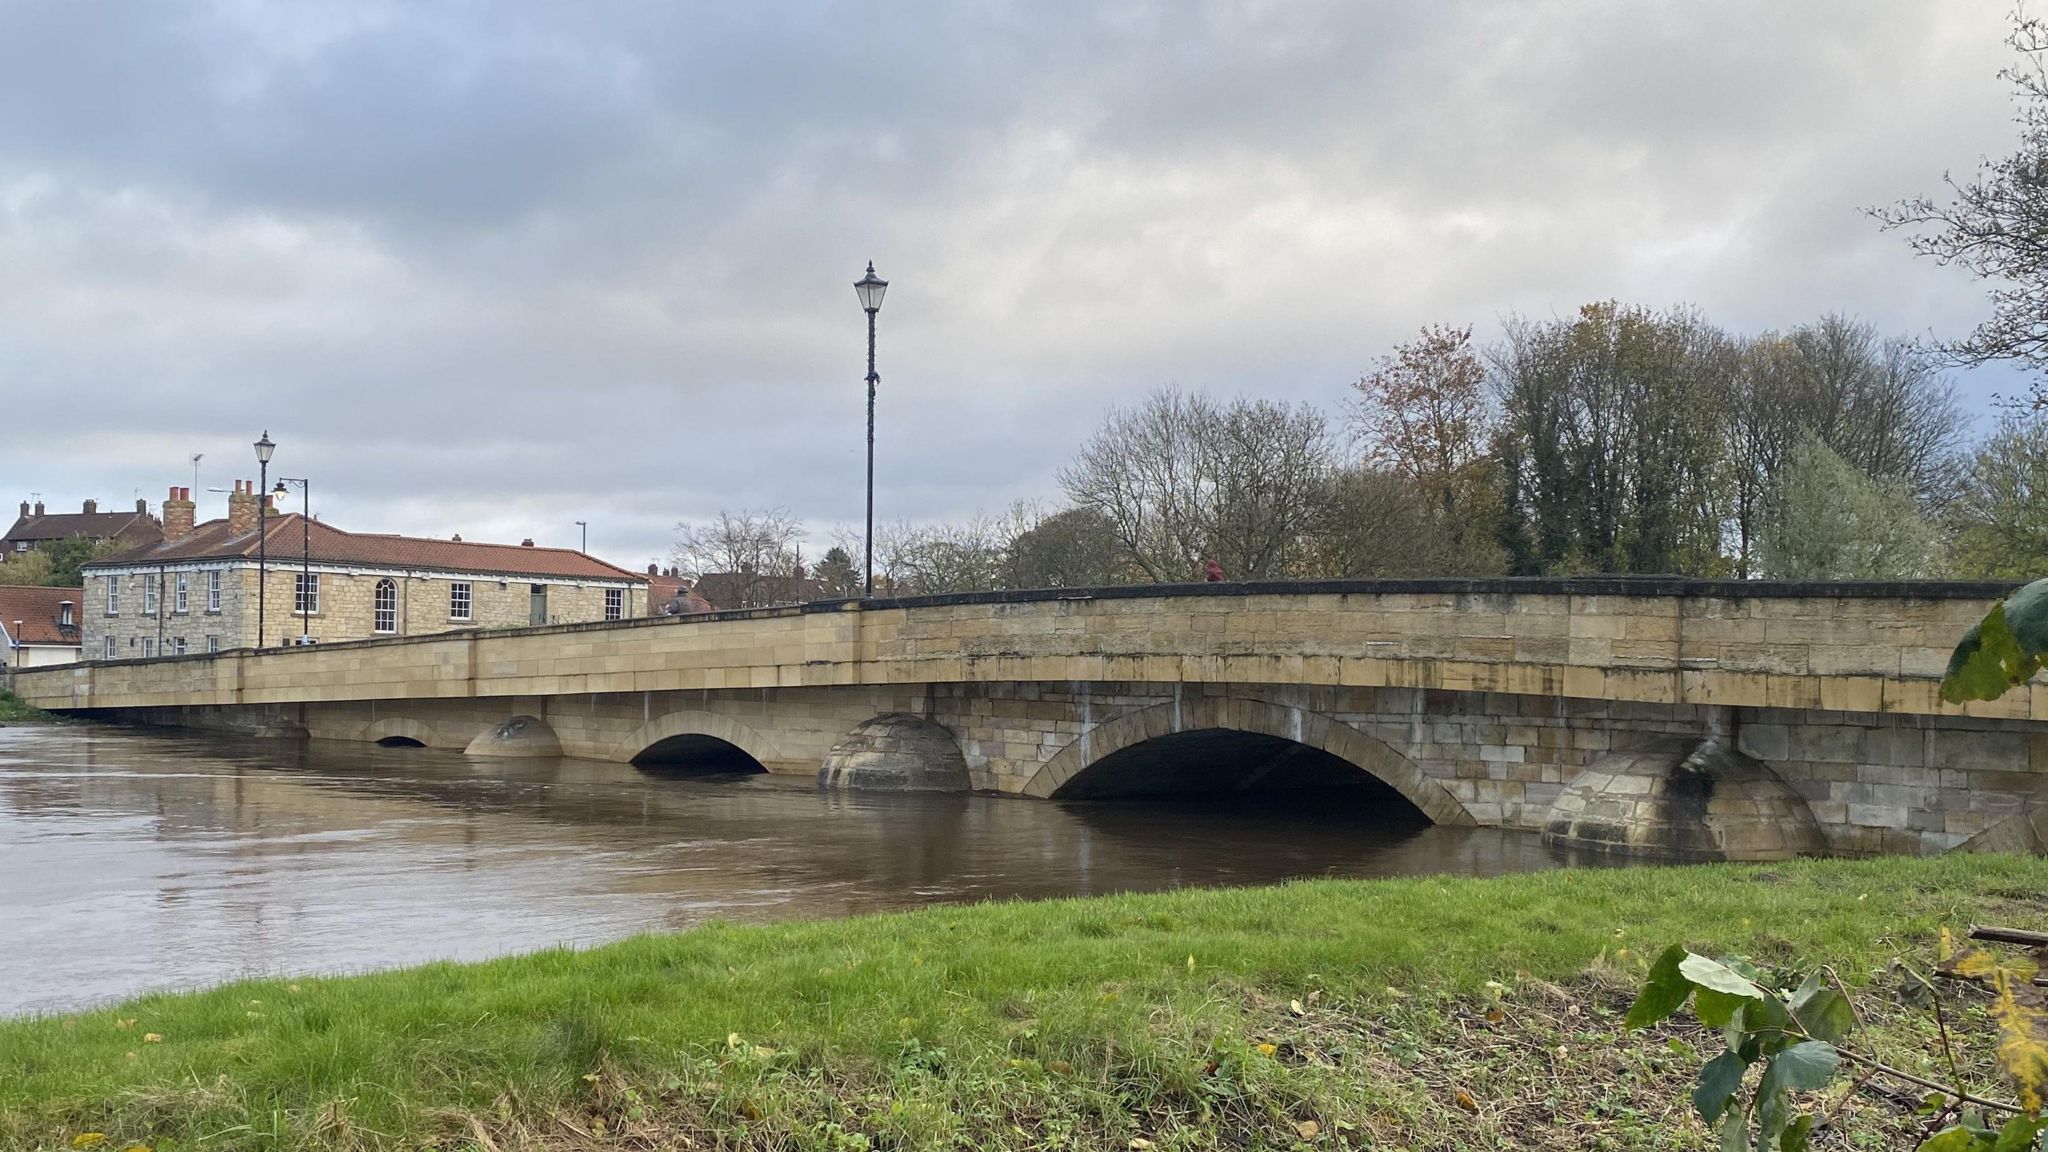 Tadcaster Bridge with river levels high underneath